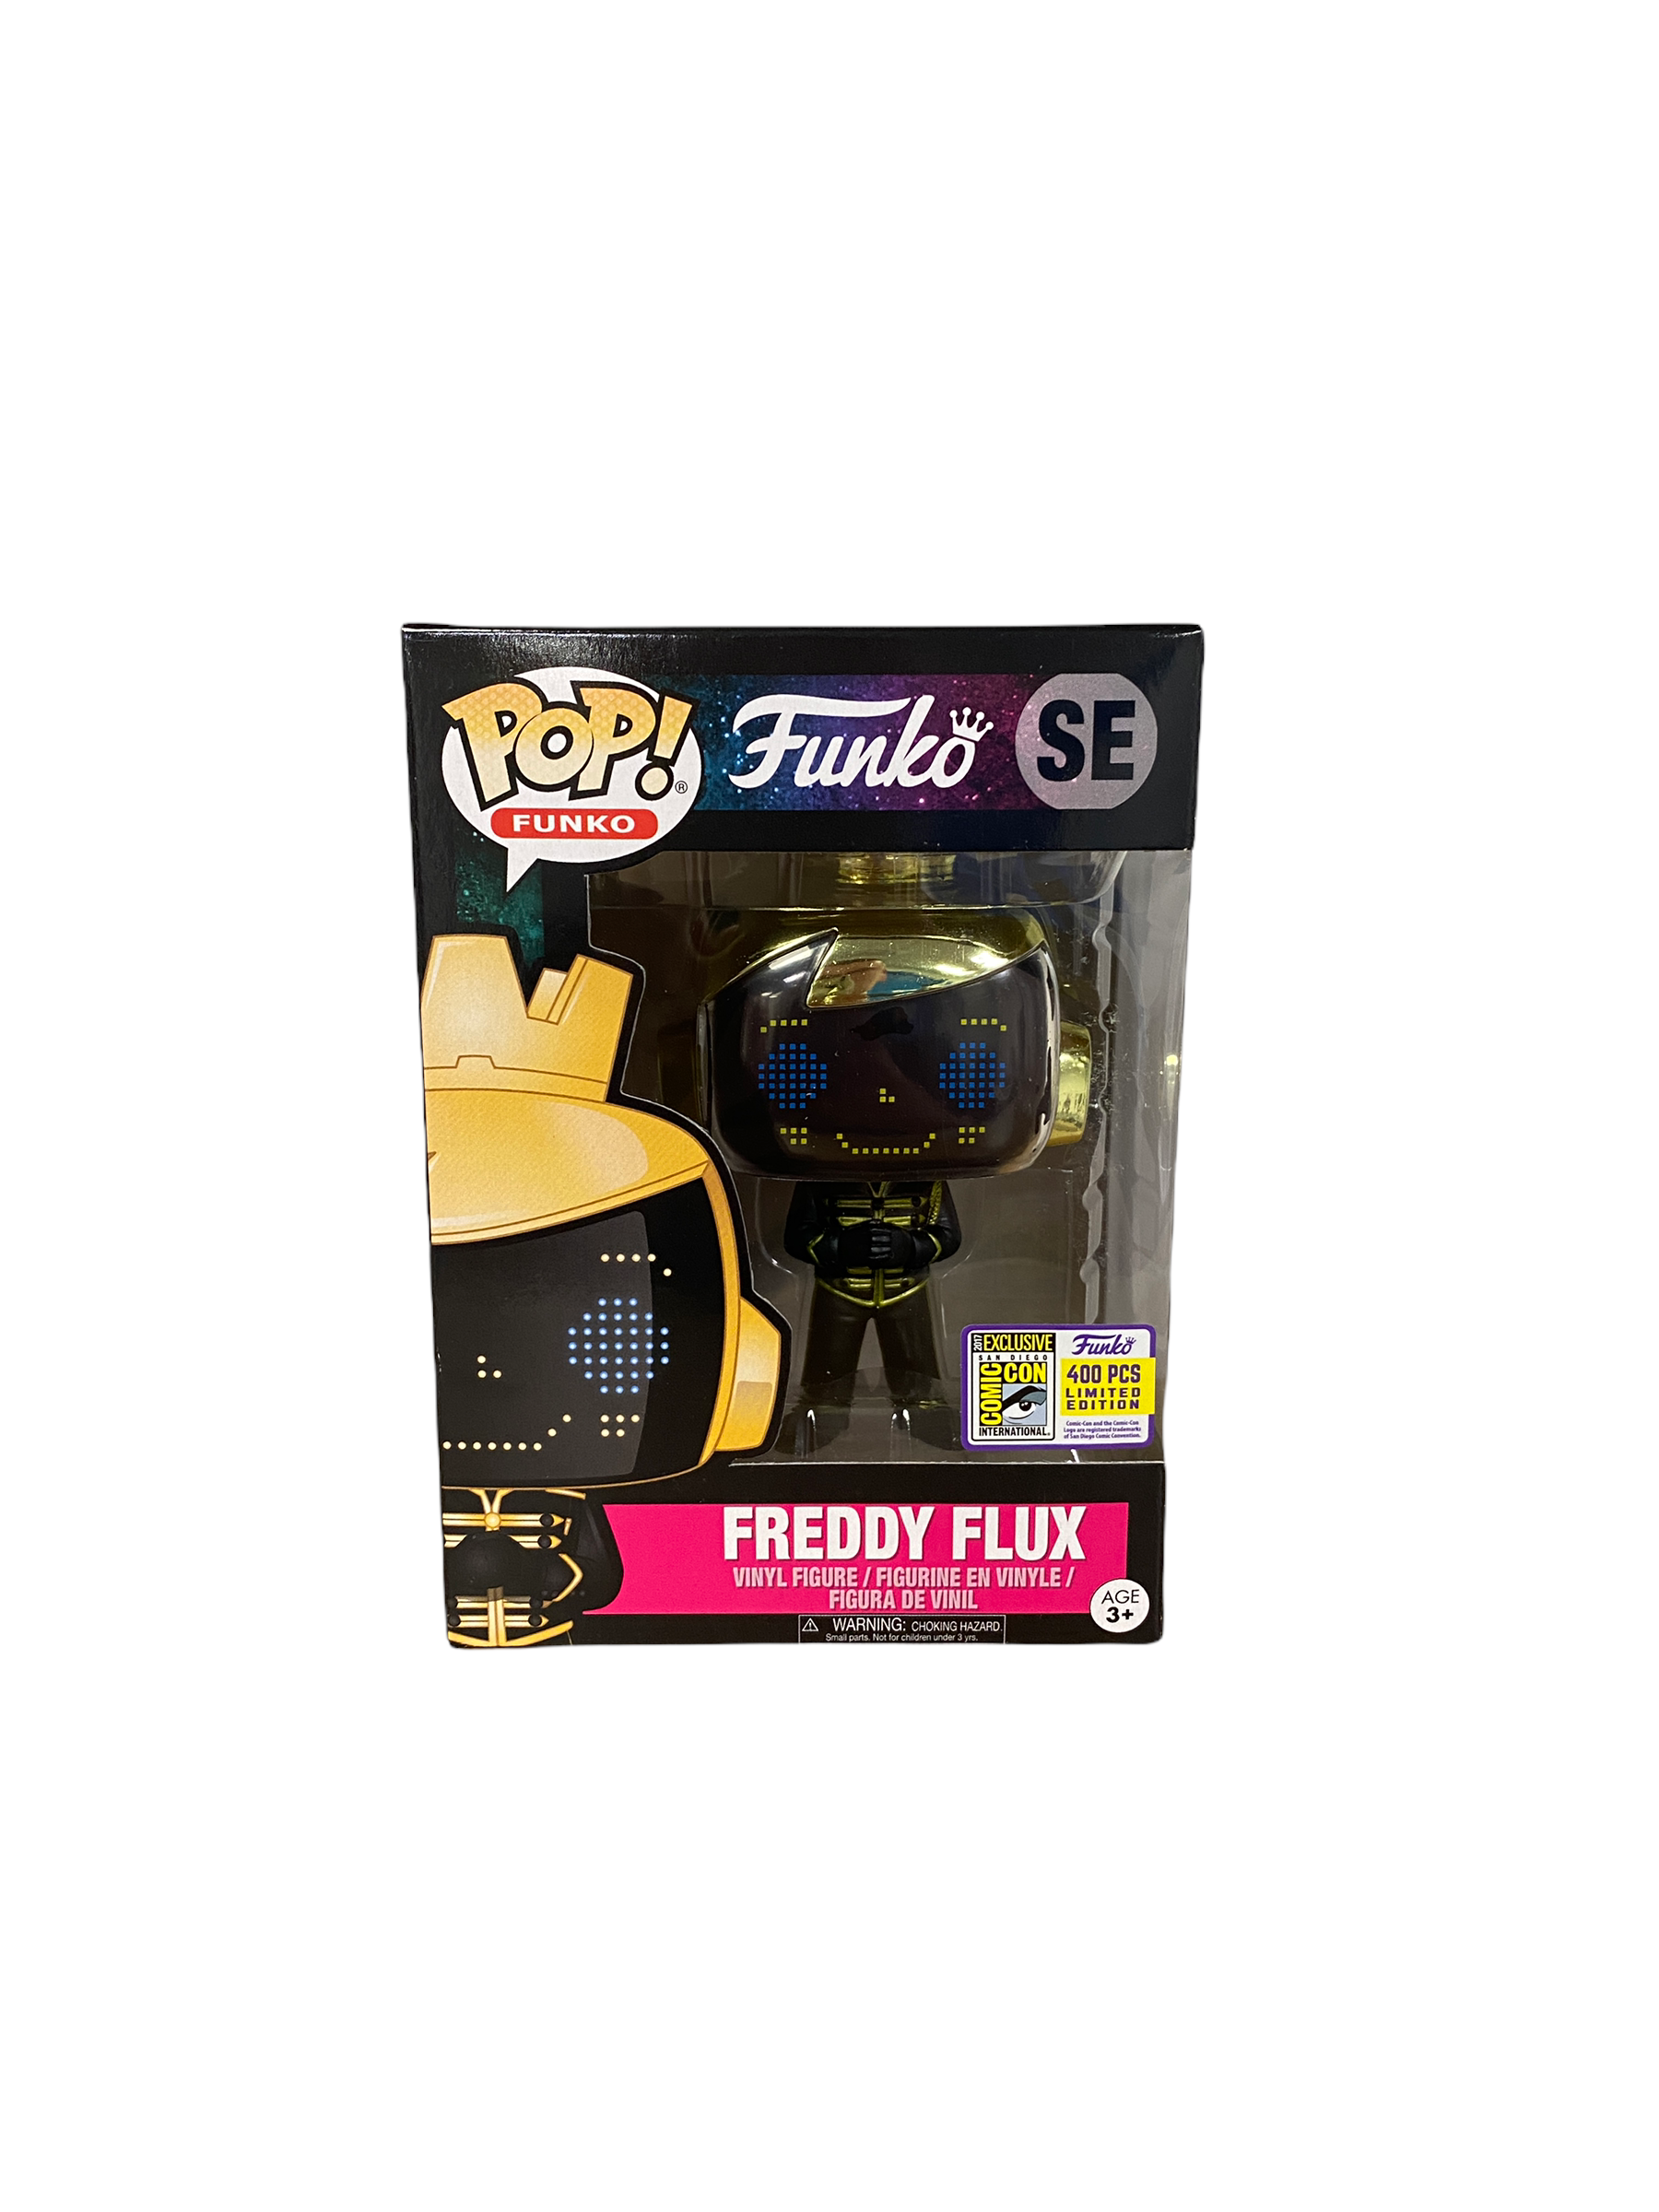 Freddy Flux Set Of 4 - SDCC 2017 Exclusive LE400 for Each Piece - Condition Varies From 9 to Mint/Near Mint